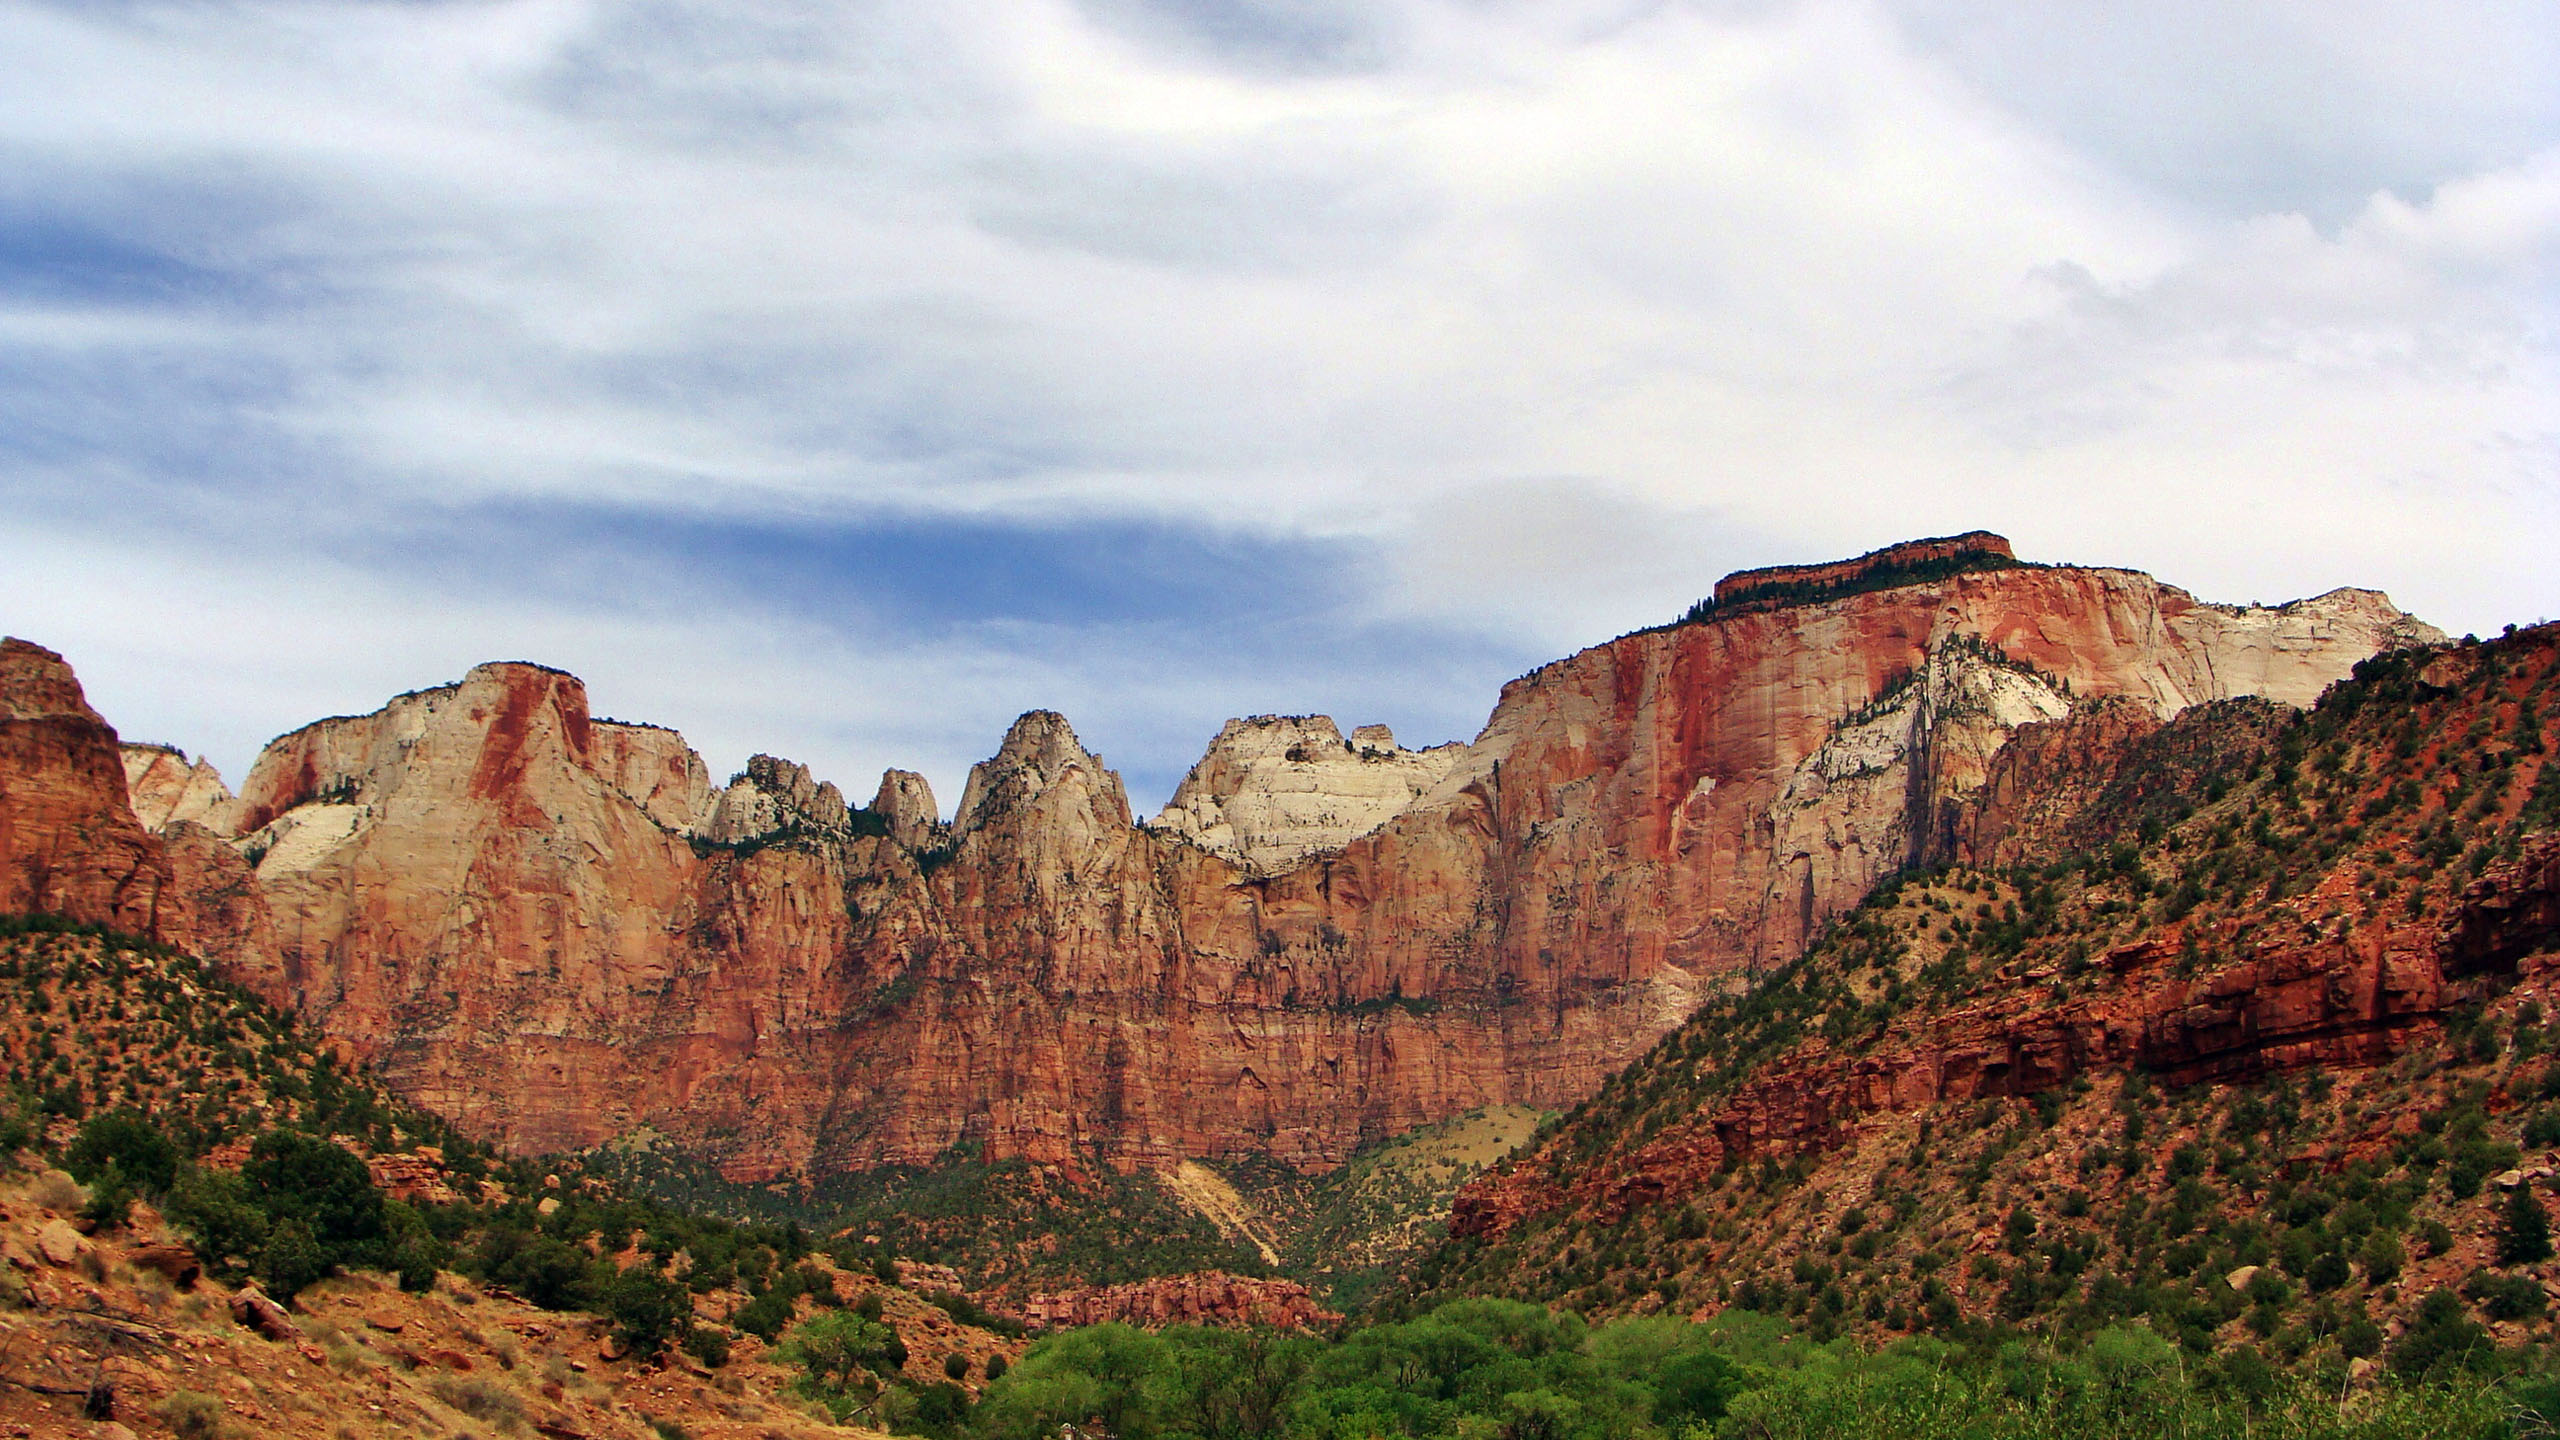 Hq Zion National Park Images - Tafi Del Valle A Cafayate , HD Wallpaper & Backgrounds